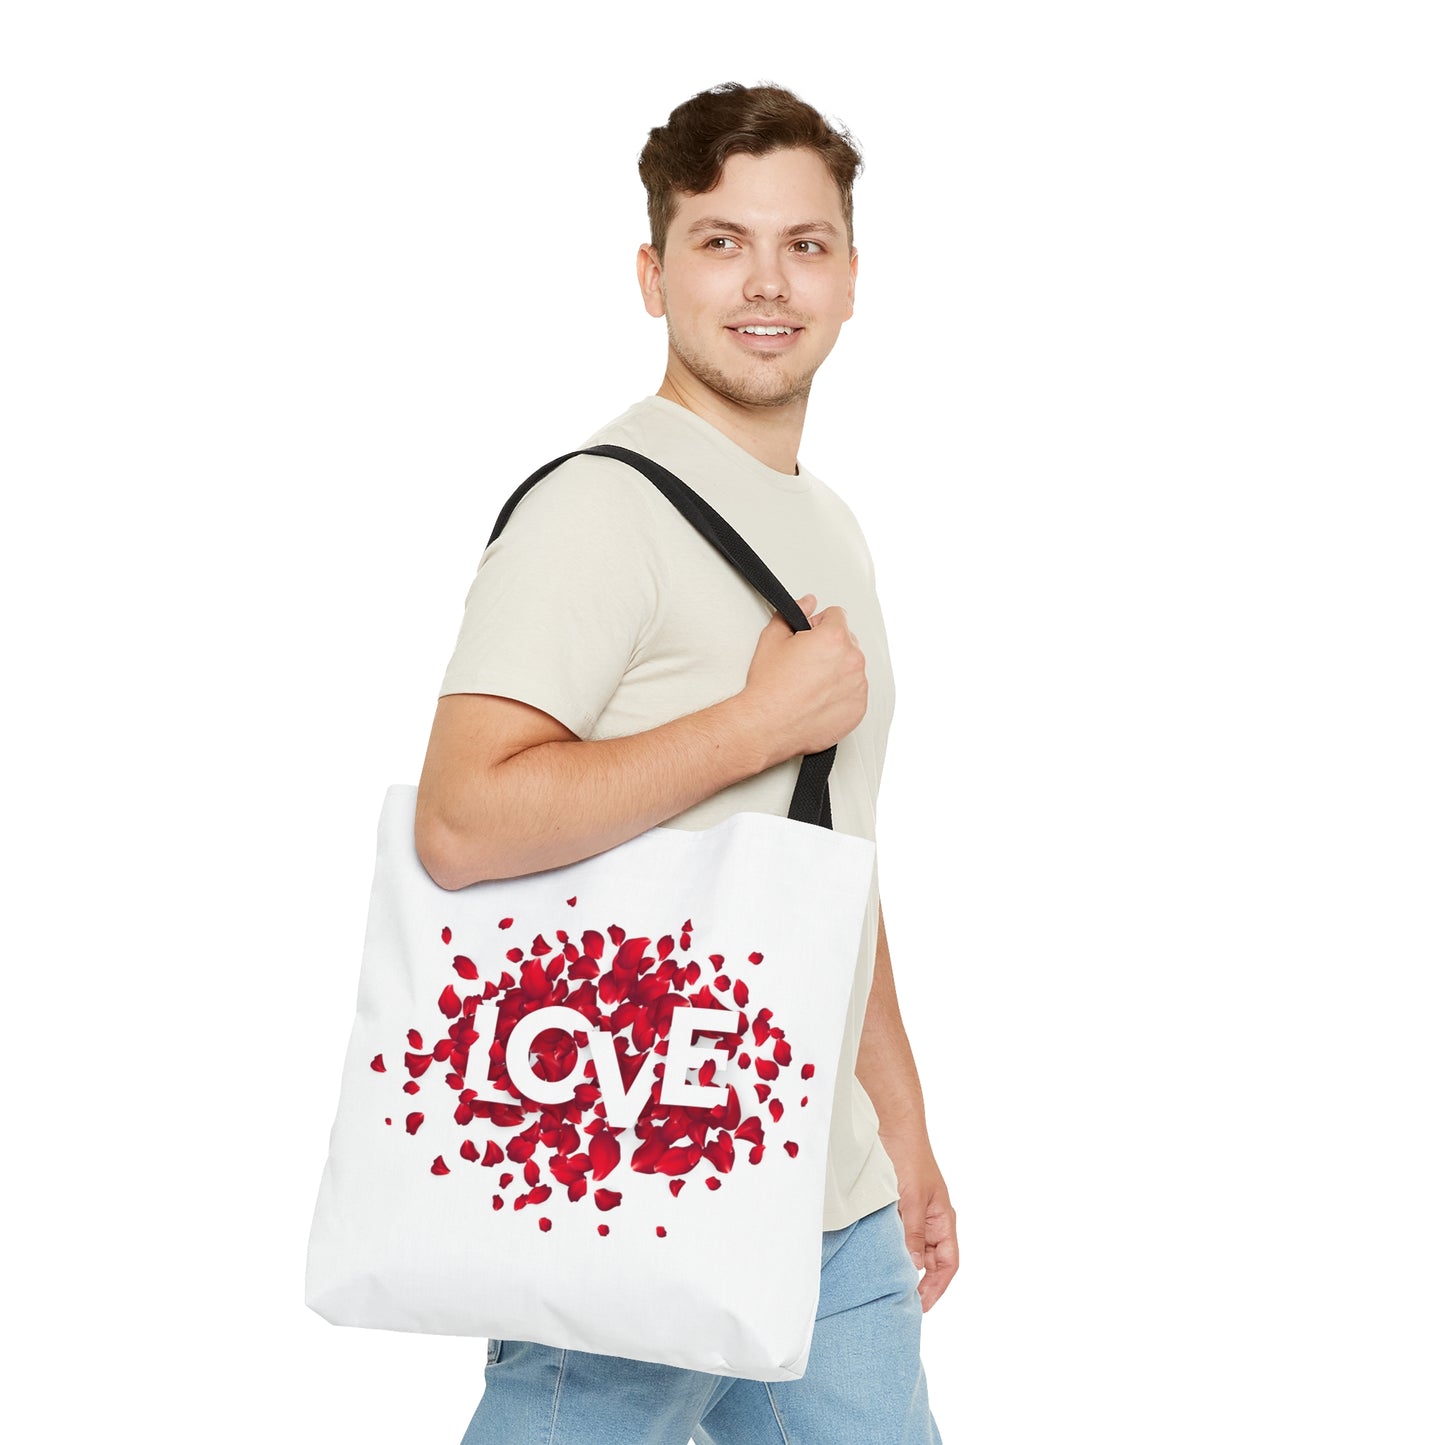 Stylish Love with Flowers Printed Tote Bag, Valentine's Tote Bag